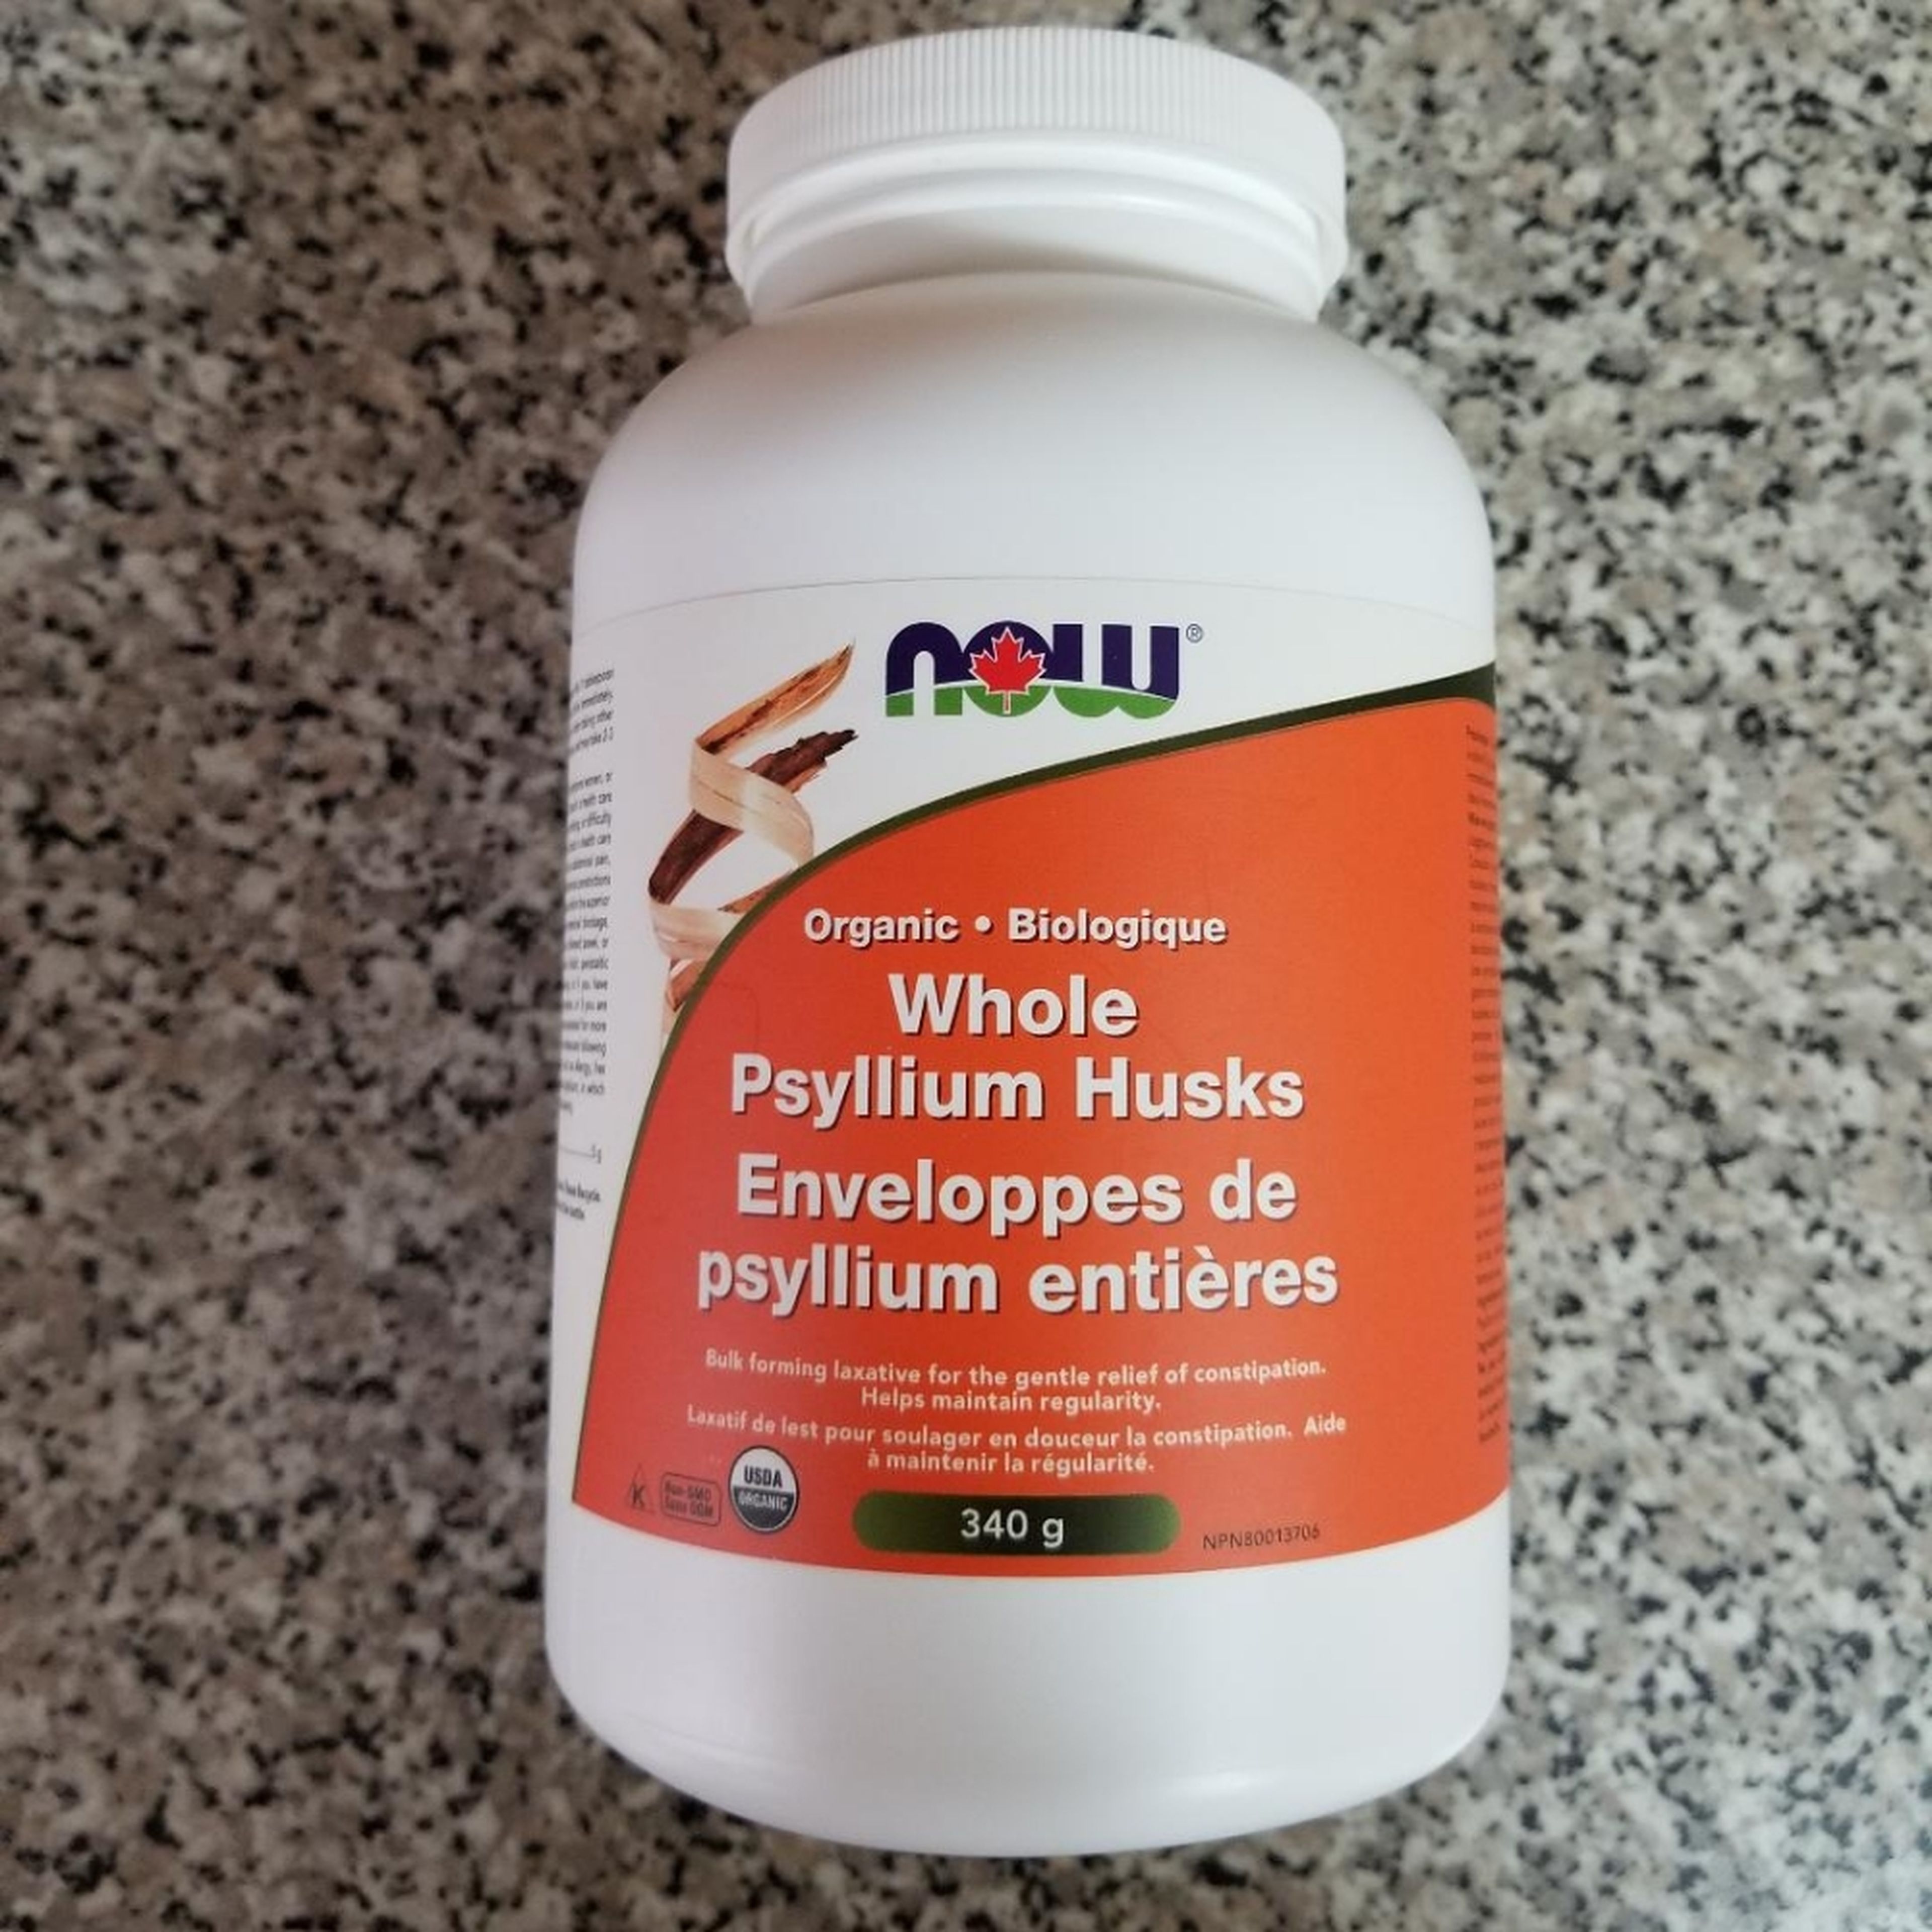 Add 30g whole psyllium husks. Available at Whole Foods and most Nutrition Health stores.